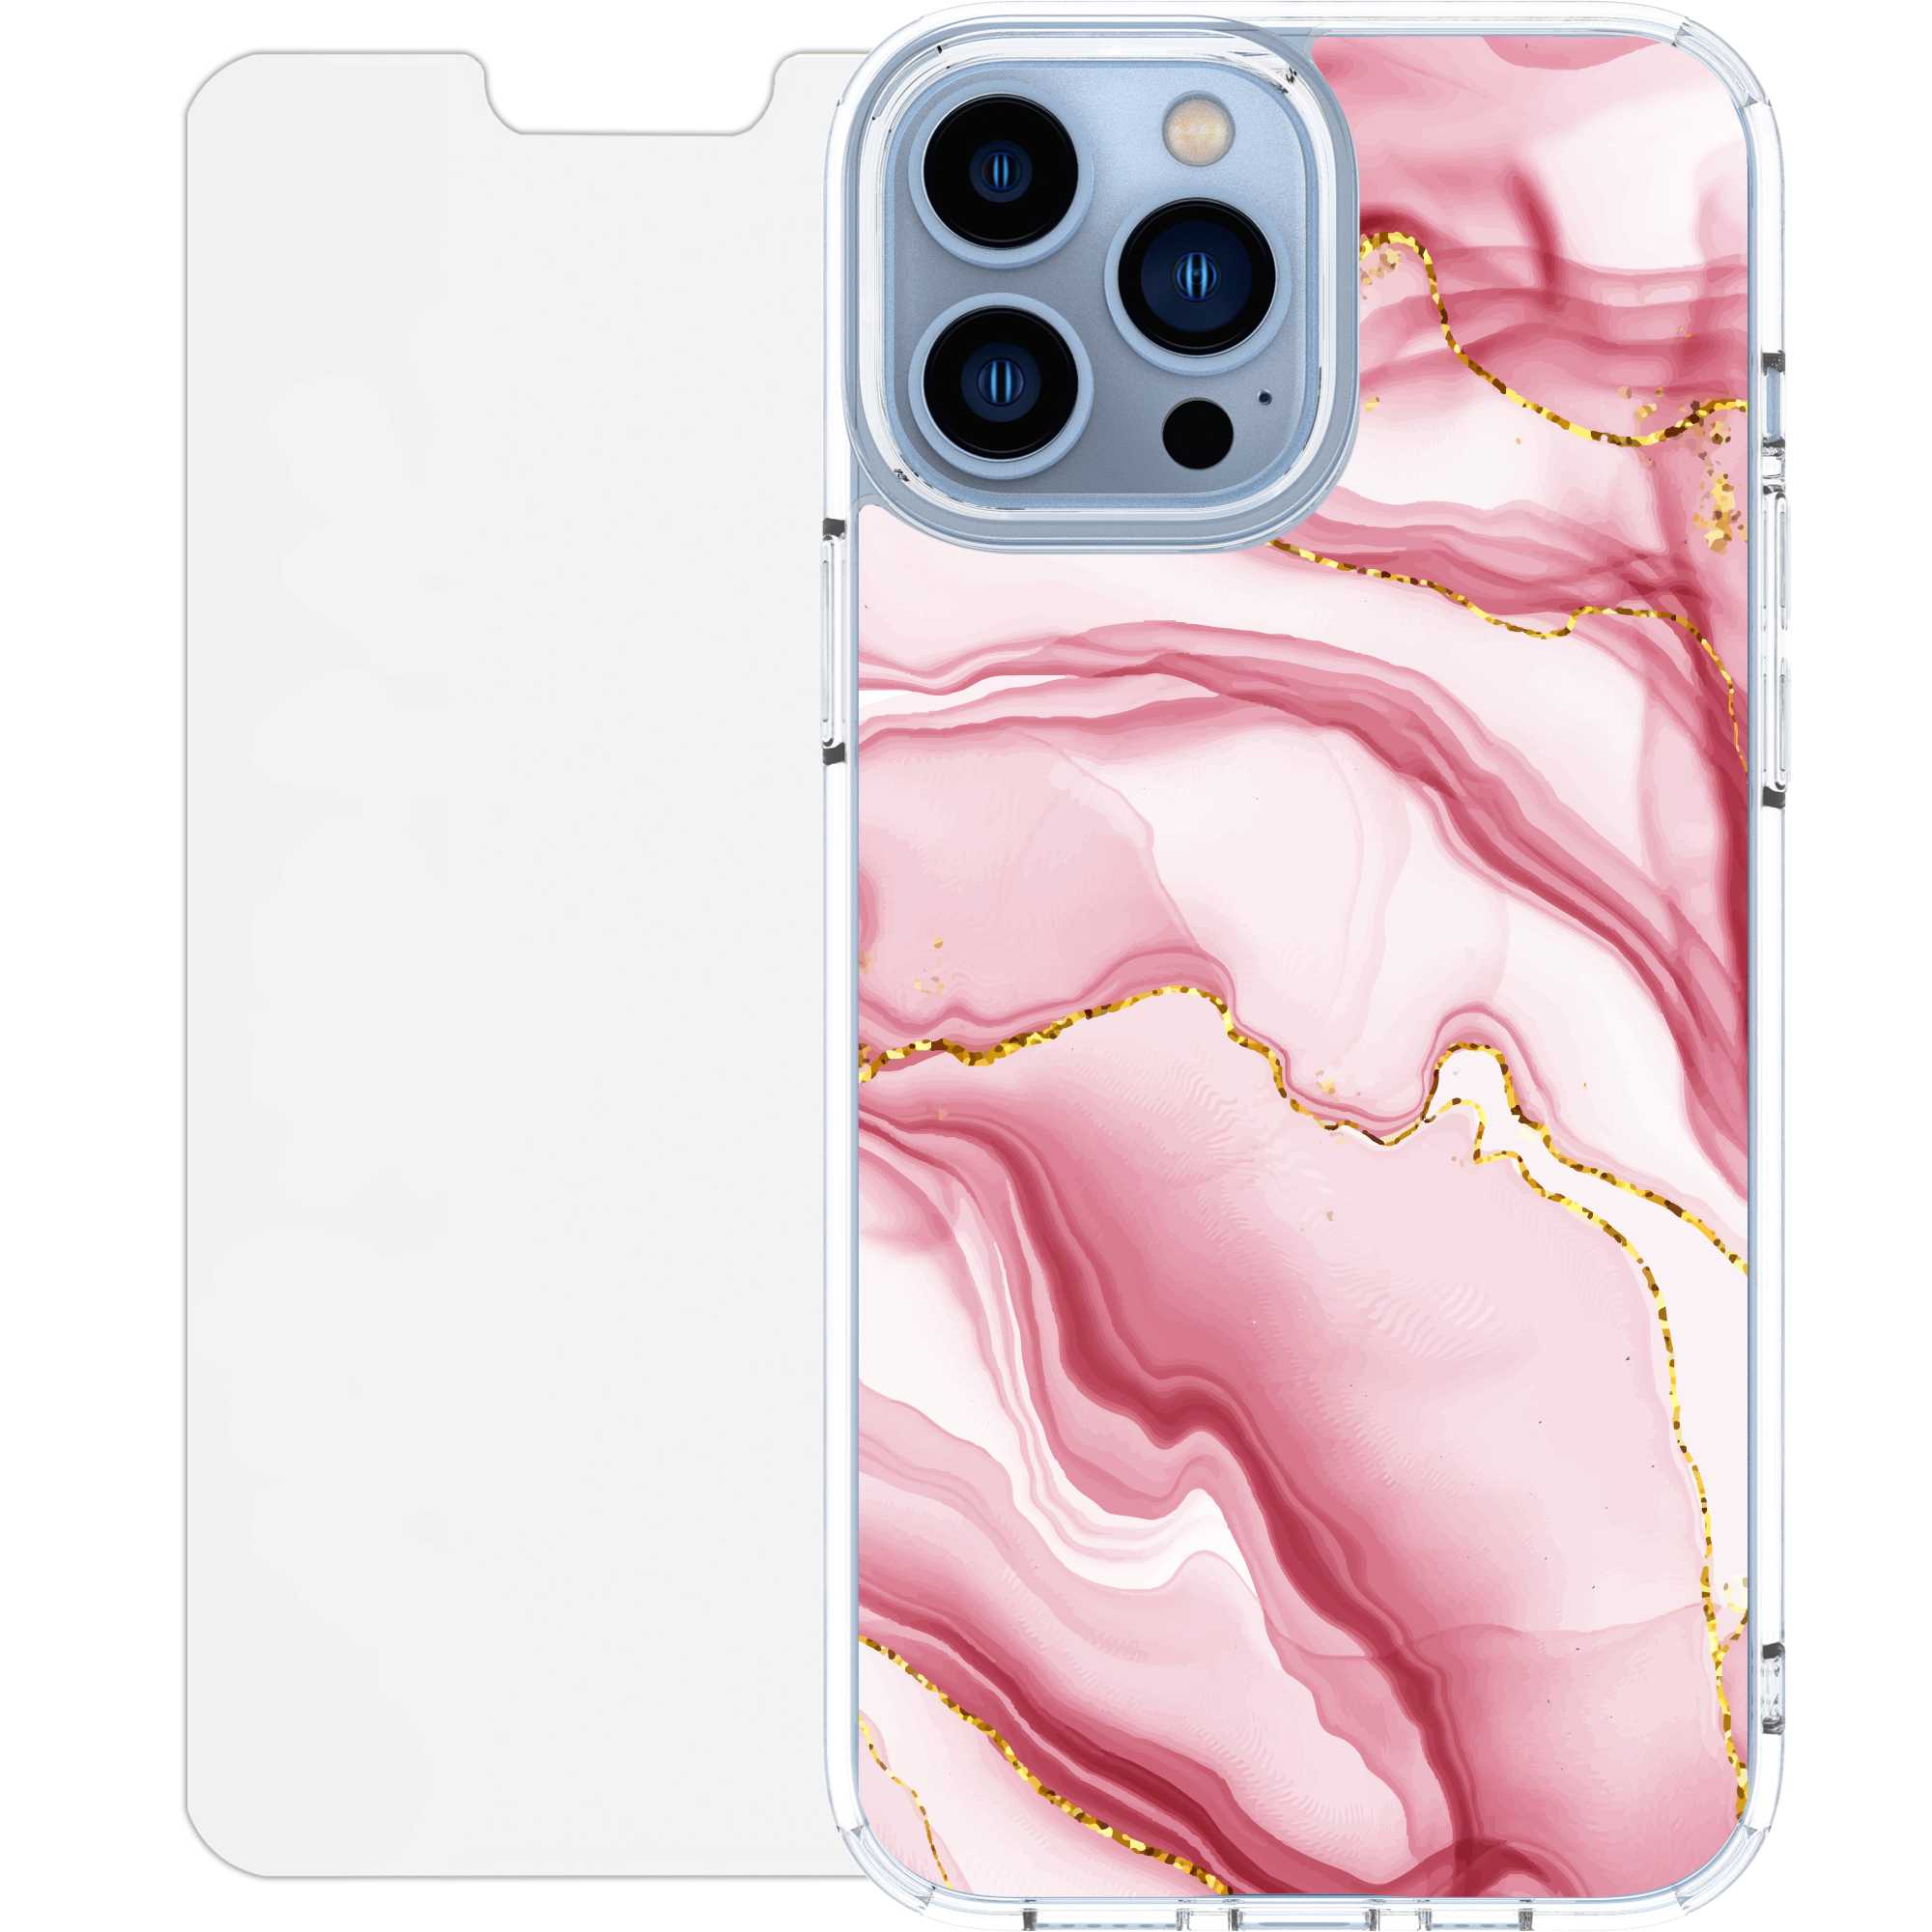 Scooch CrystalCase for iPhone 13 Pro Max BlushMarble Scooch CrystalCase